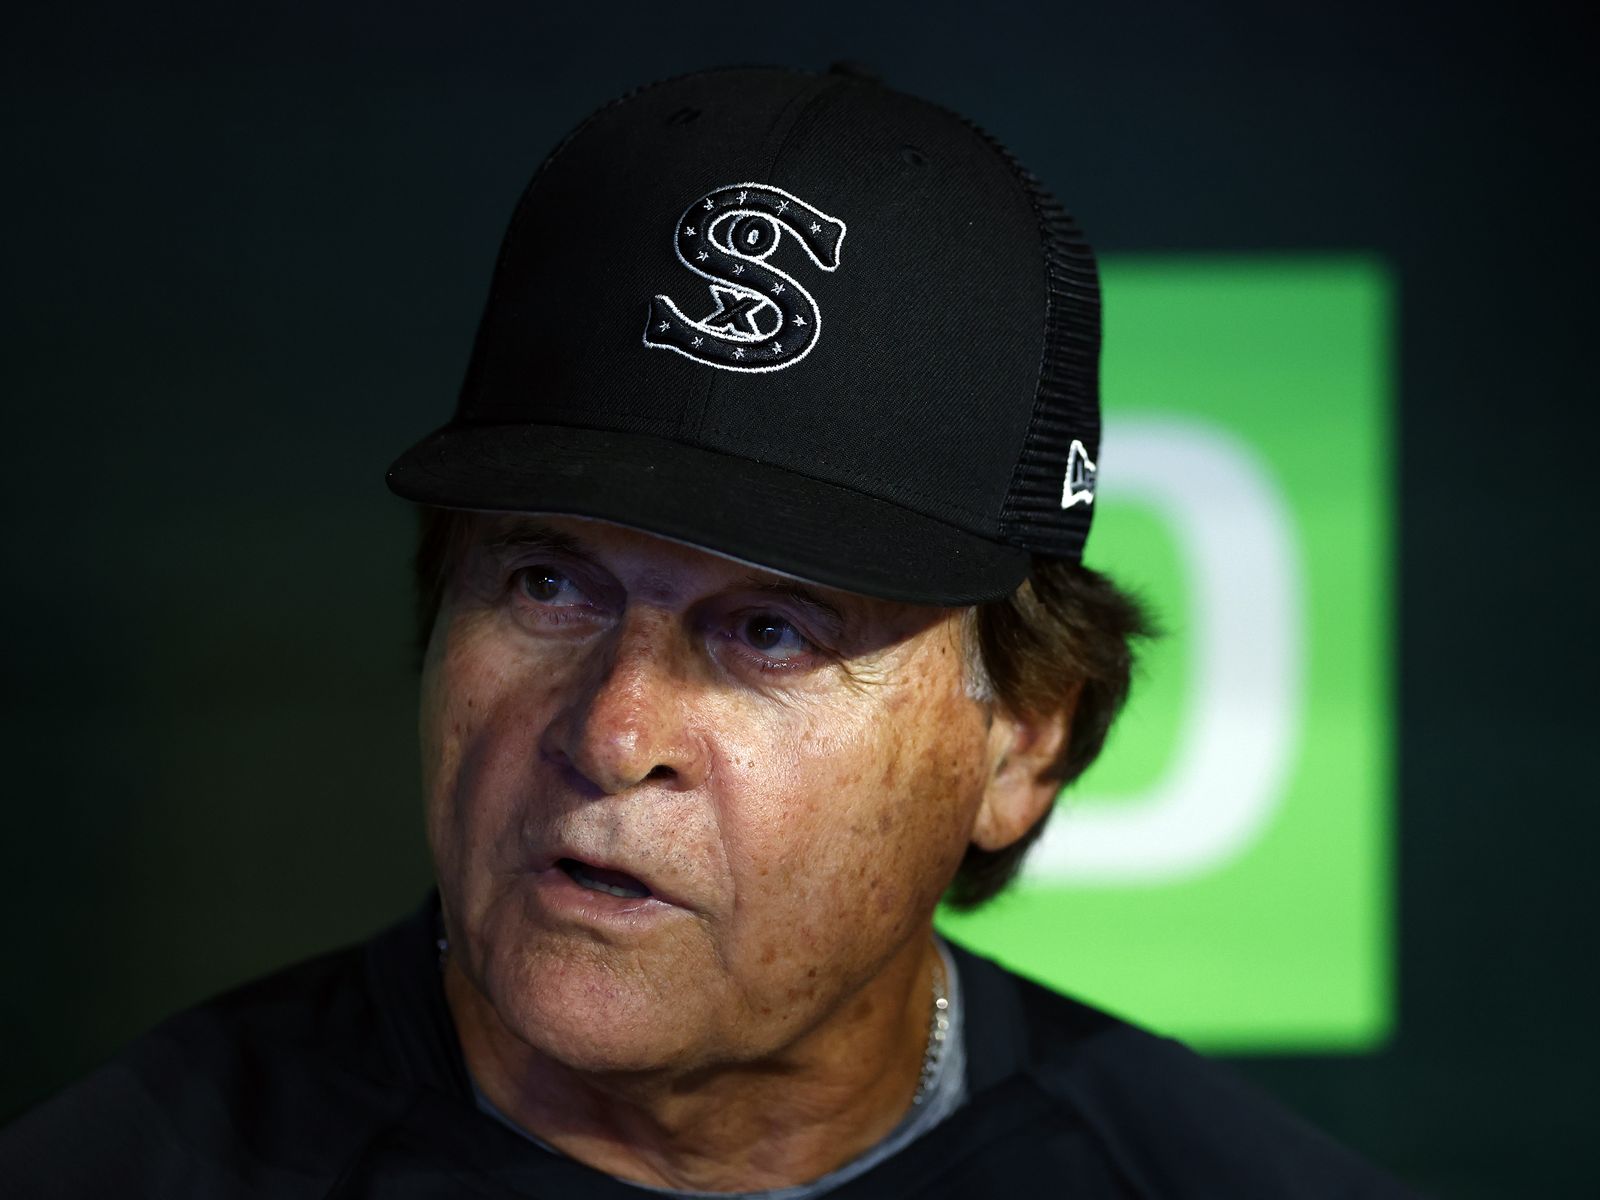 Tony La Russa returns to Boston as White Sox manager after two